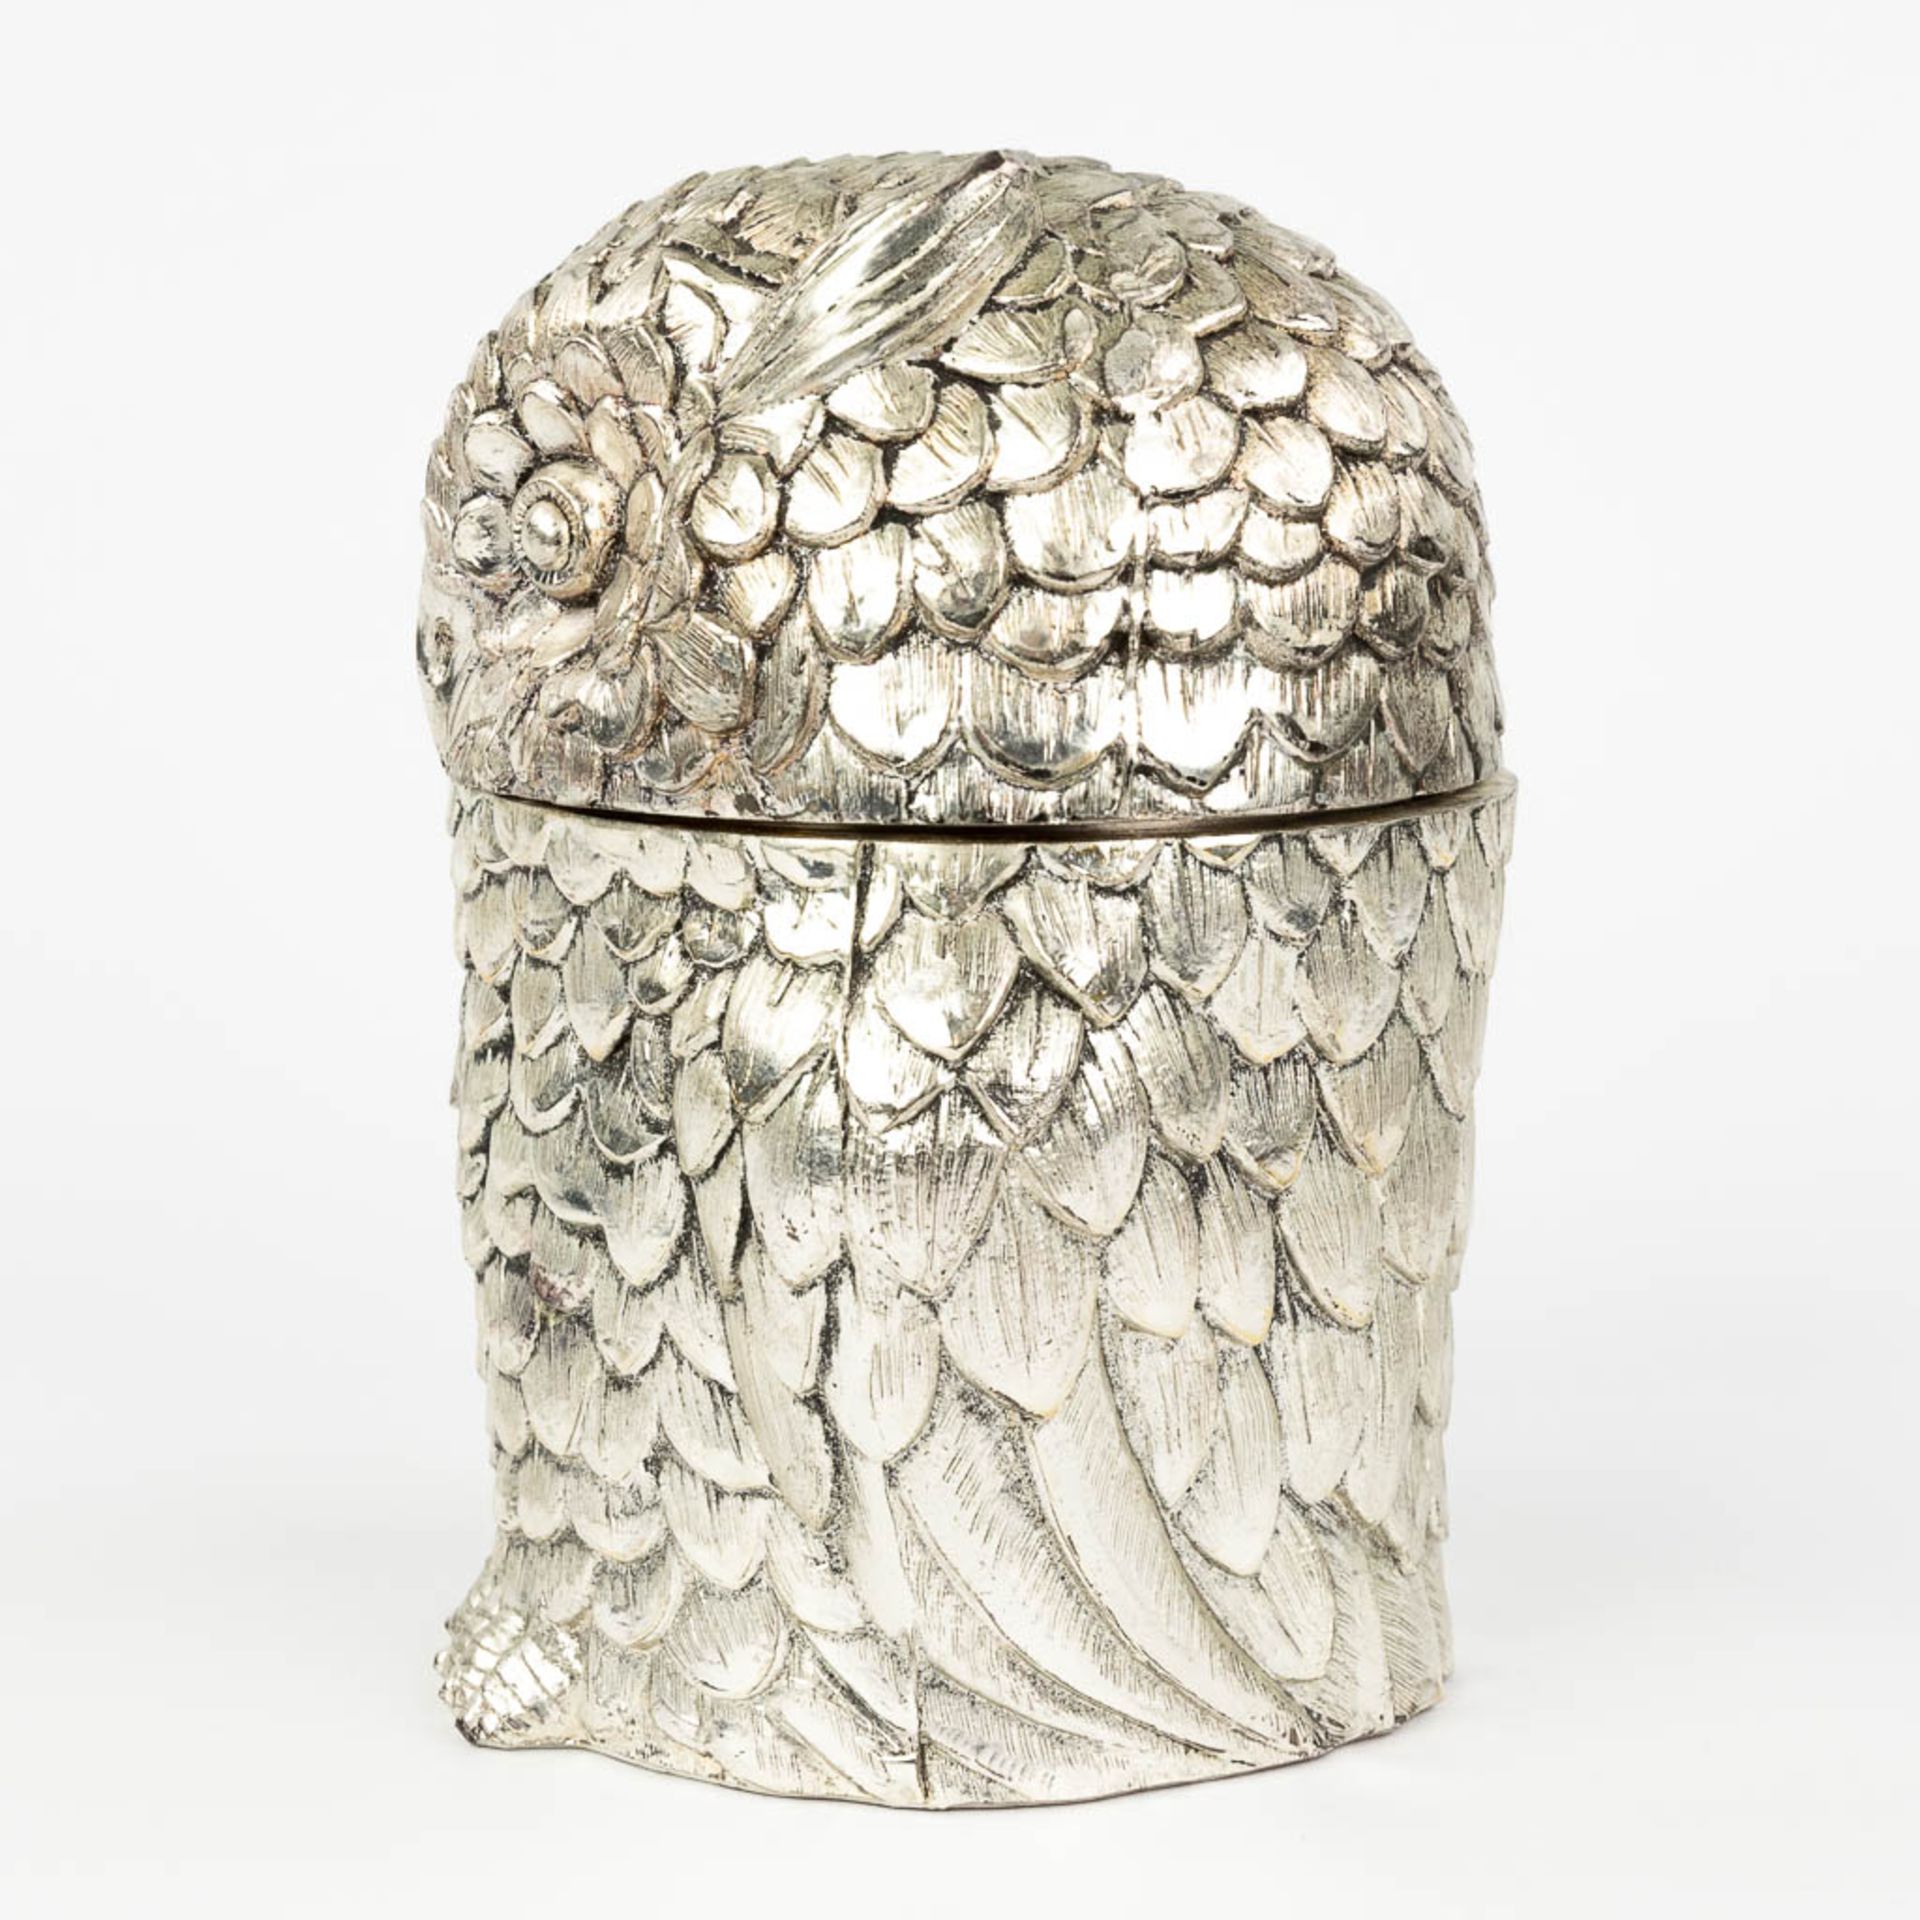 Mauro MANETTI (1946) 'Owl' a mid-century ice-pail. (W:15 x H:20 cm) - Image 12 of 12